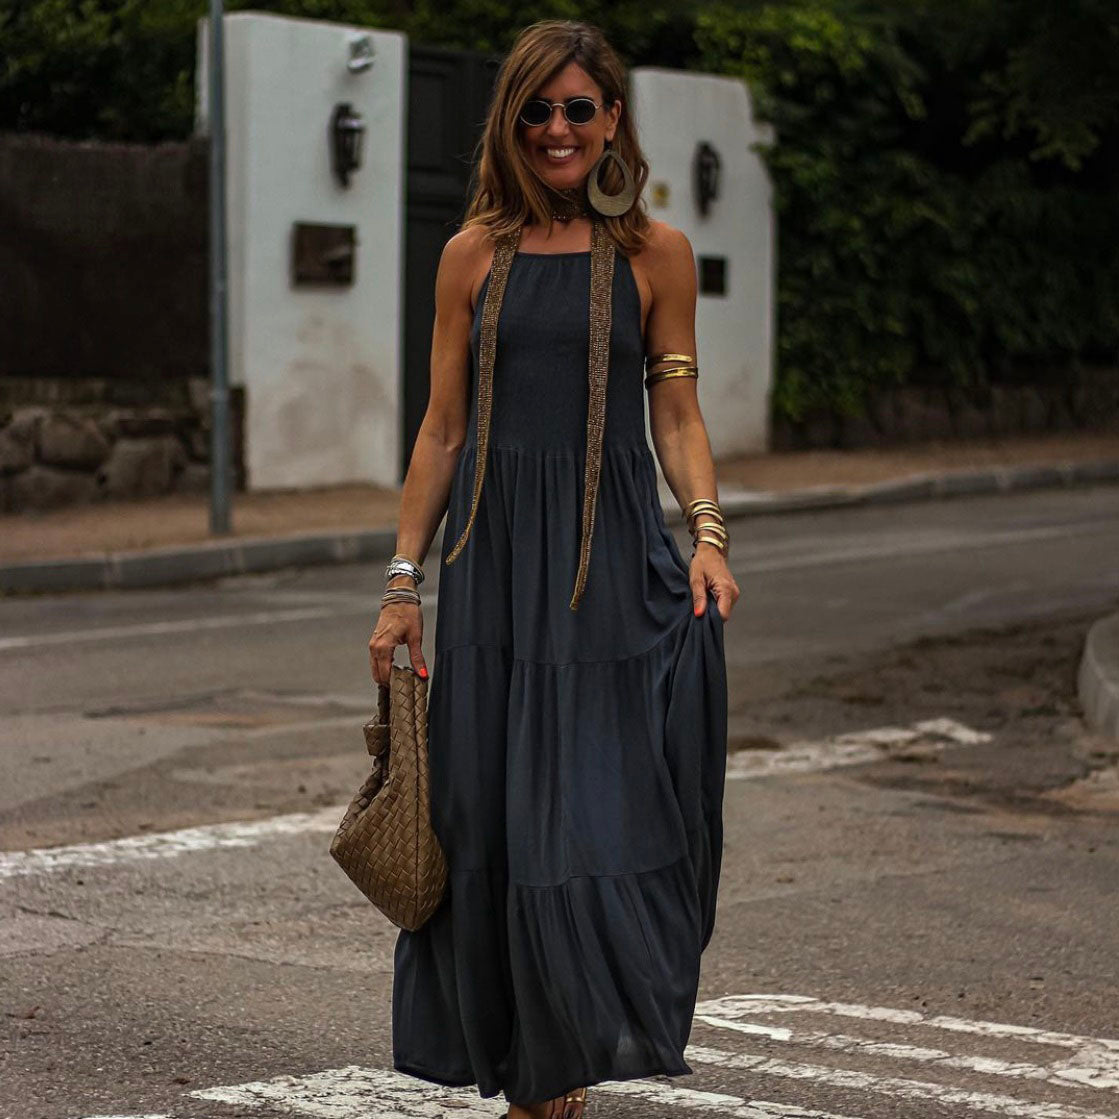 Grey ruched dress